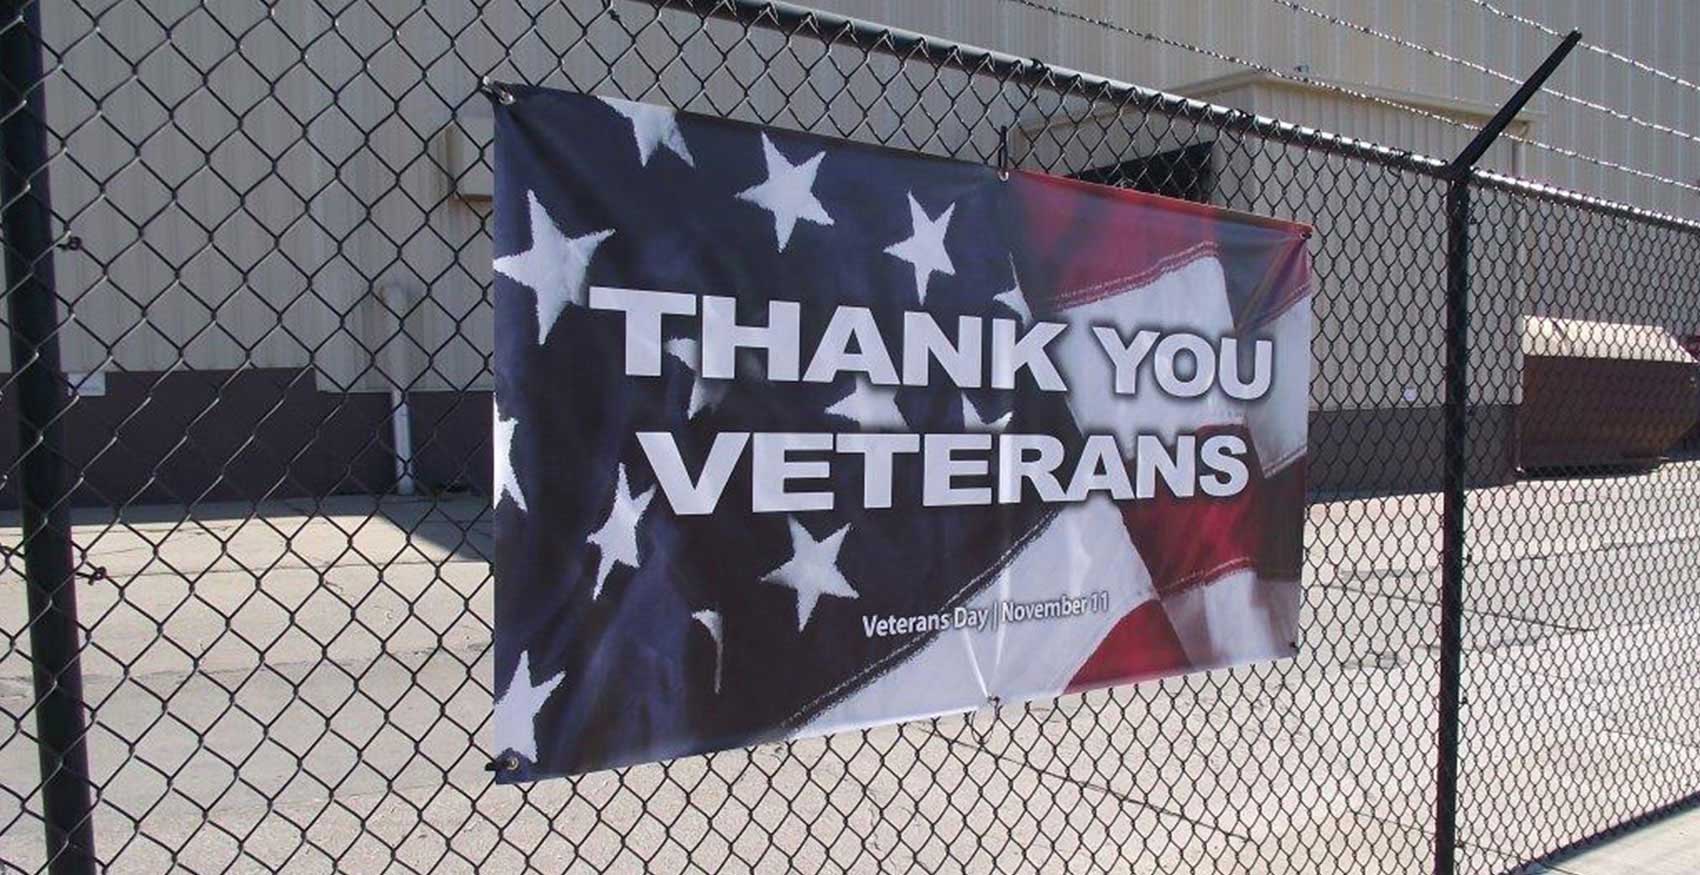 Thank You Veterans banner hanging on fence